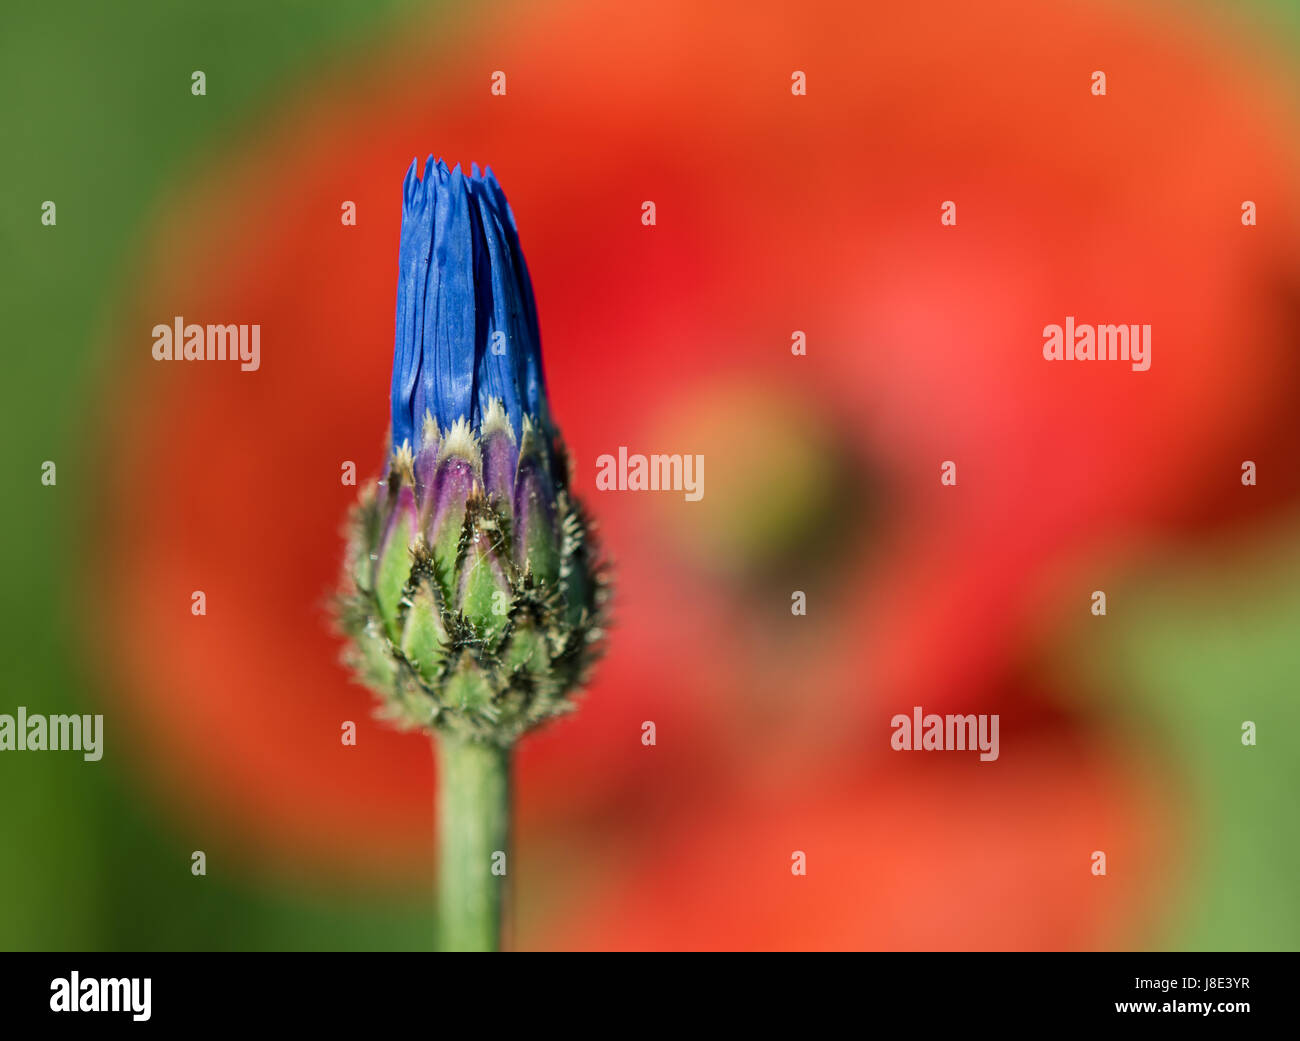 Blue bloosoms of a nearly-closed cornflower shine bright next to a red corn poppy blossom in the morning sun on a green corn field in Sieversdorf, Germany, 27 May 2017. Photo: Patrick Pleul/dpa-Zentralbild/ZB Stock Photo